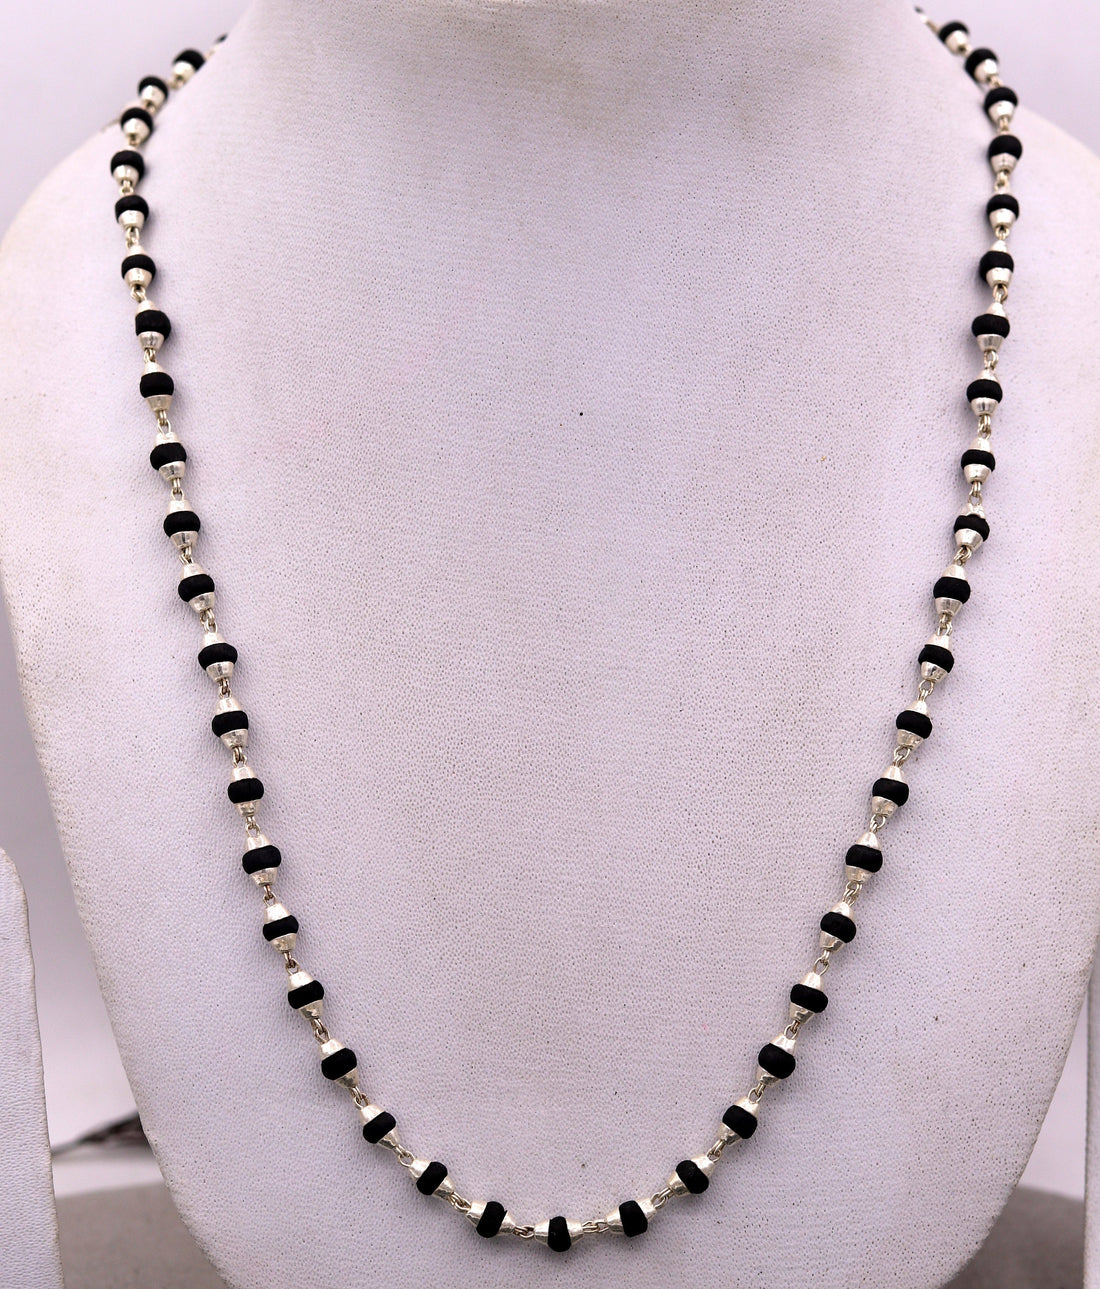 Handmade Sterling silver black basil rosary wood beads chain necklace for meditation excellent unisex tulsimala from india ch40 - TRIBAL ORNAMENTS